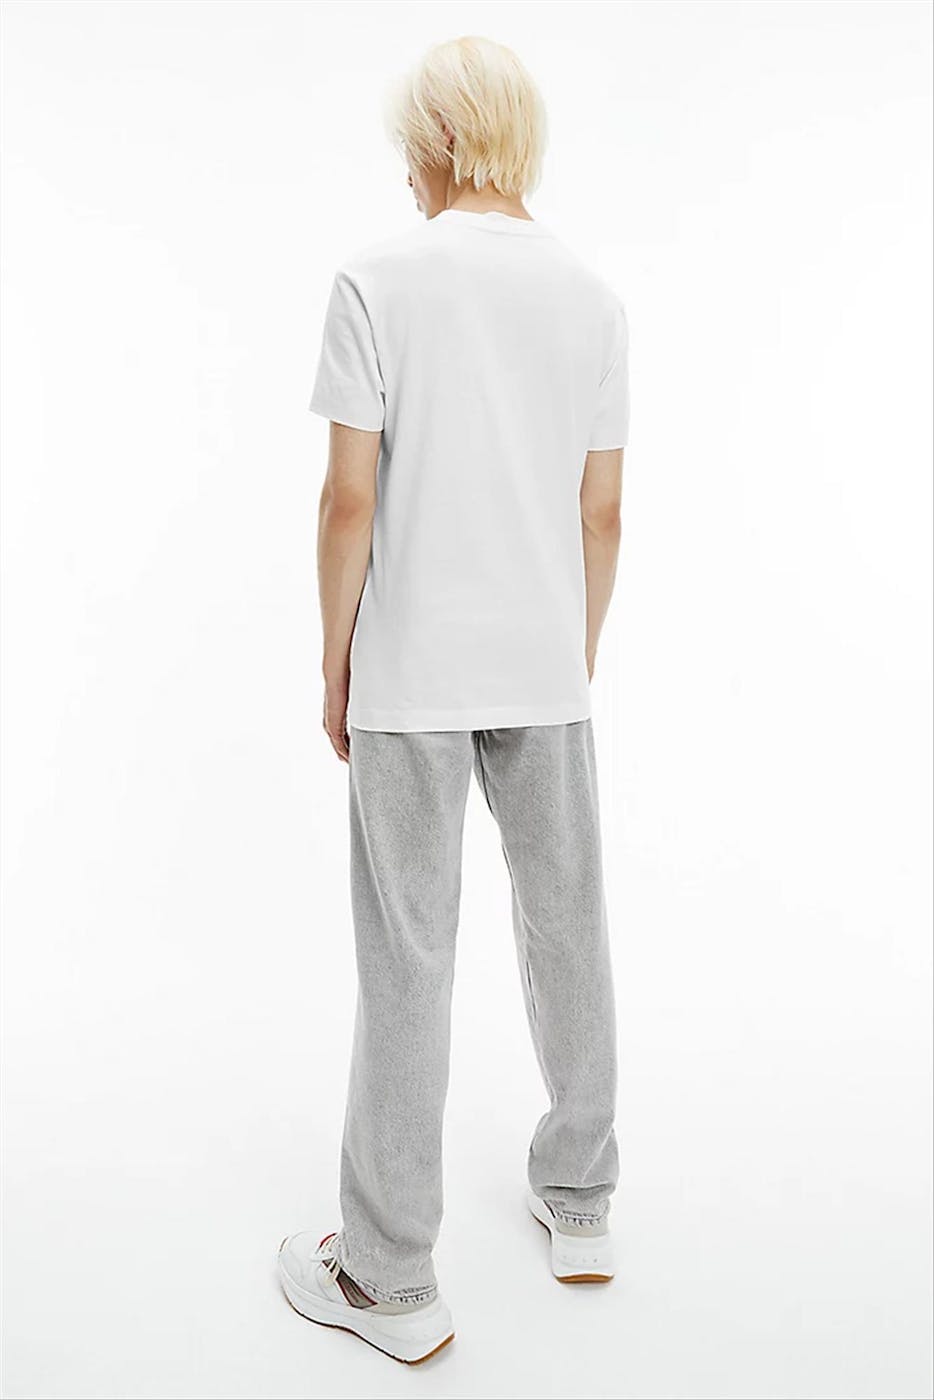 Calvin Klein Jeans - Witte Placed Logo's T-Shirt